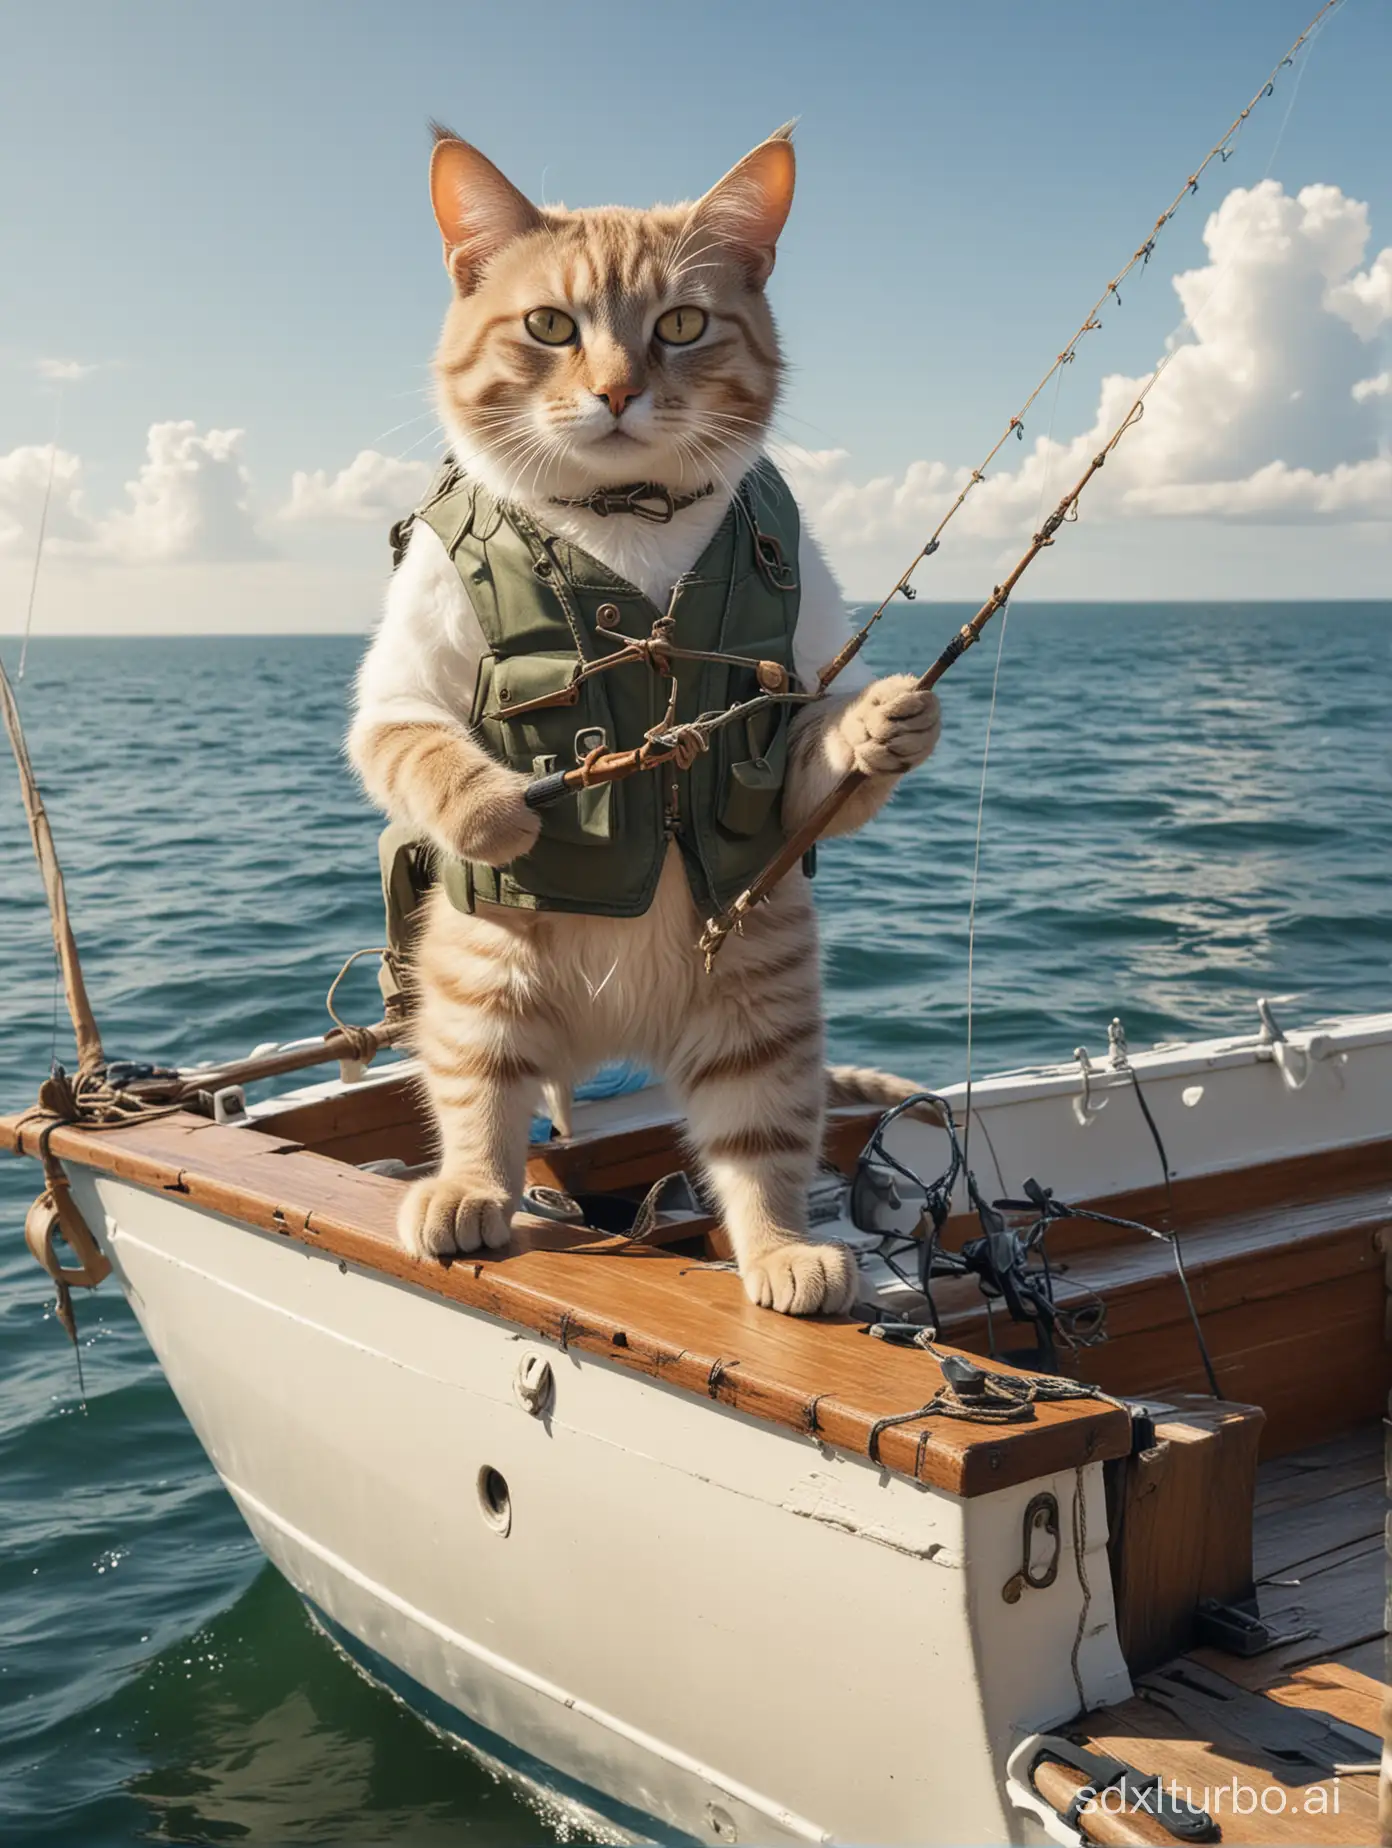 An anthropomorphic cat on a boat in the sea going fishing on a sunny day